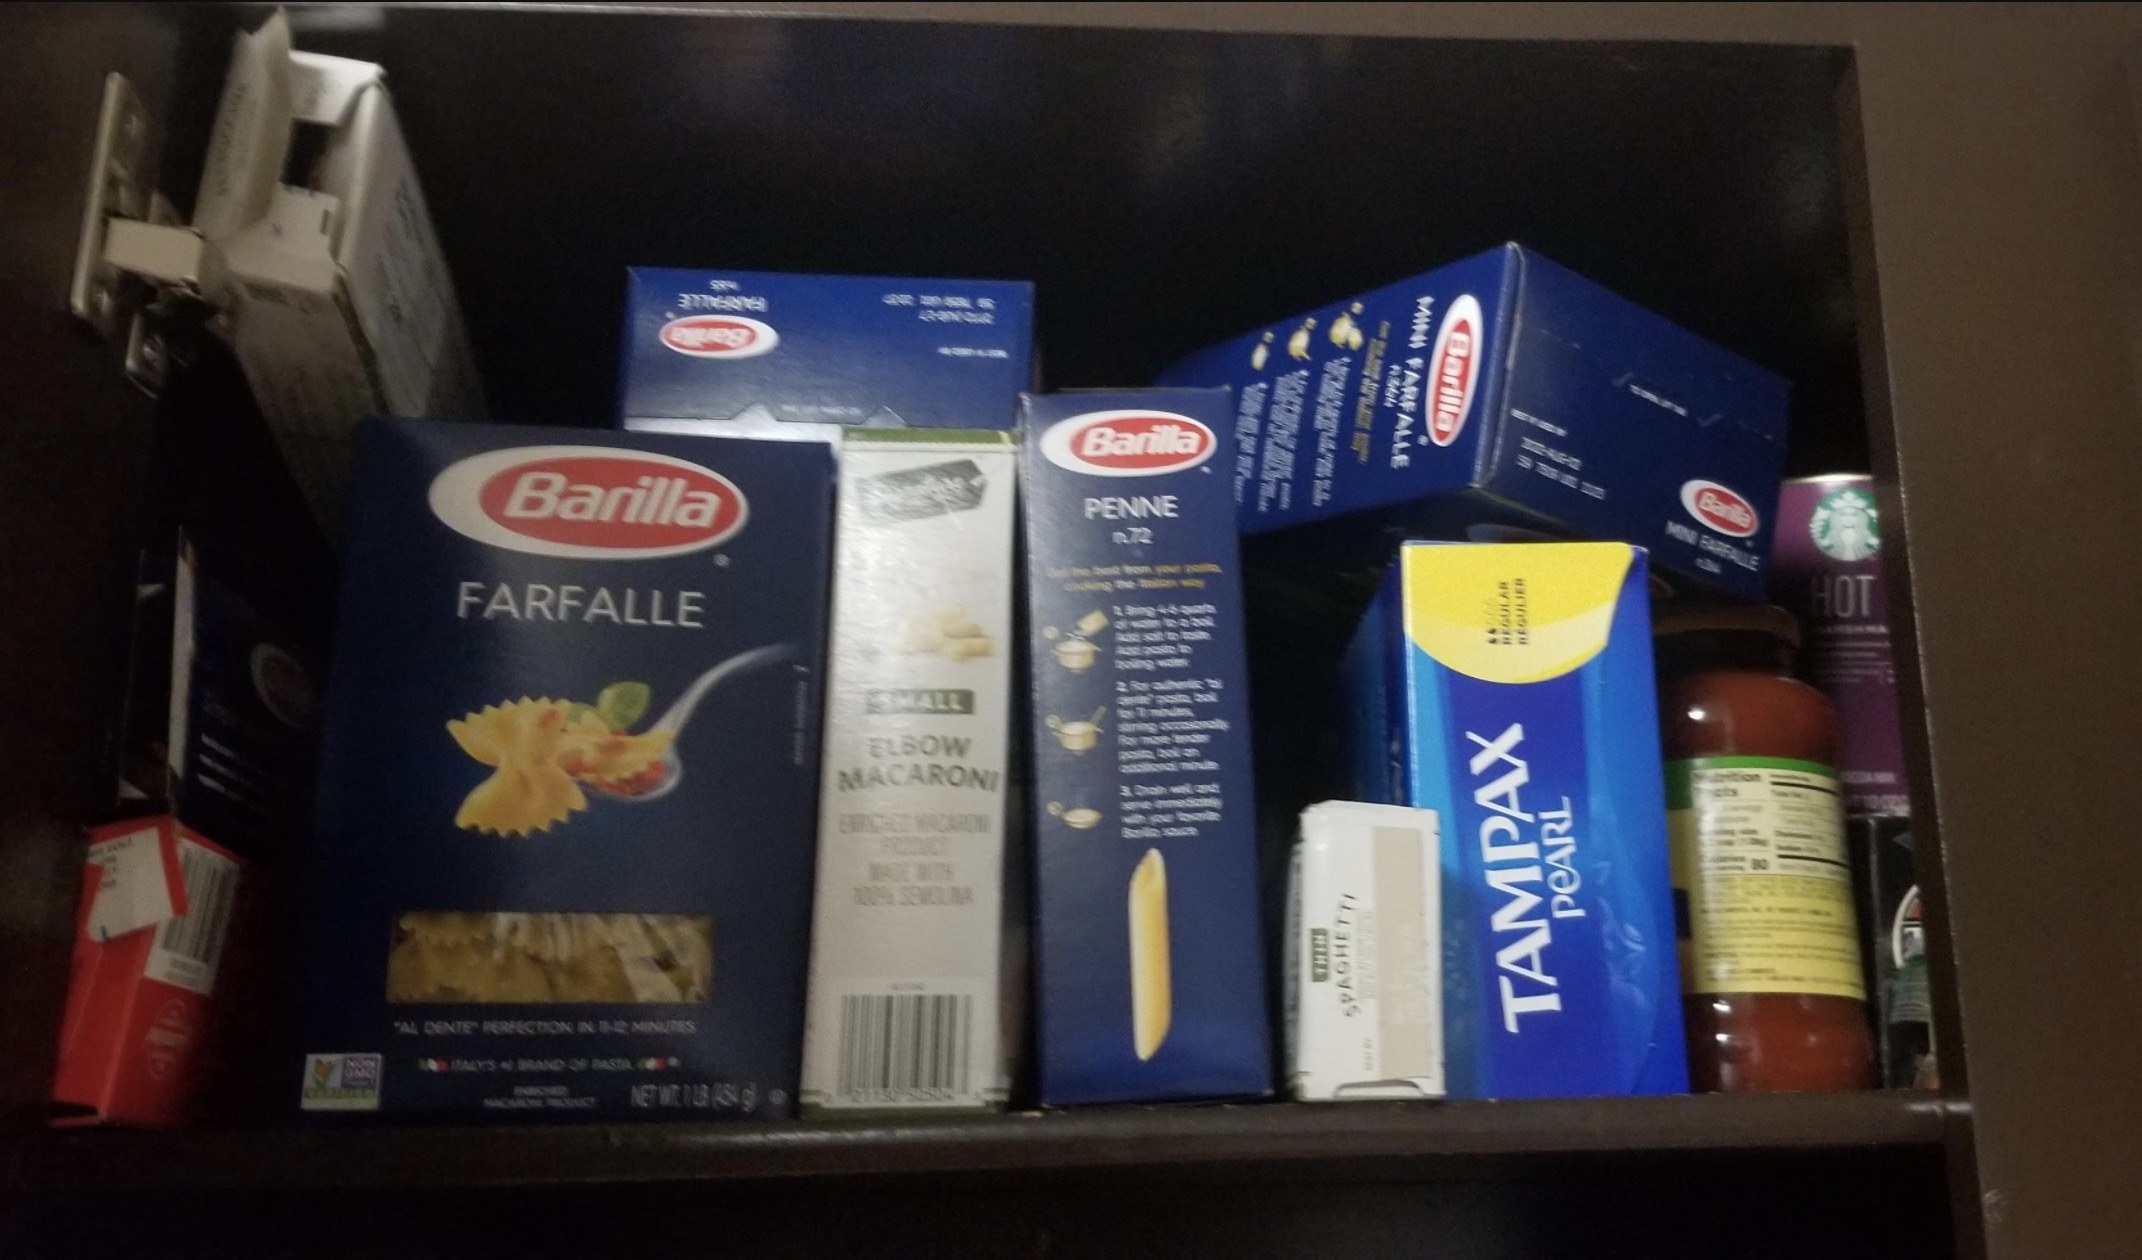 A shelf showing boxes of pasta, pasta sauce, and a box of Tampax